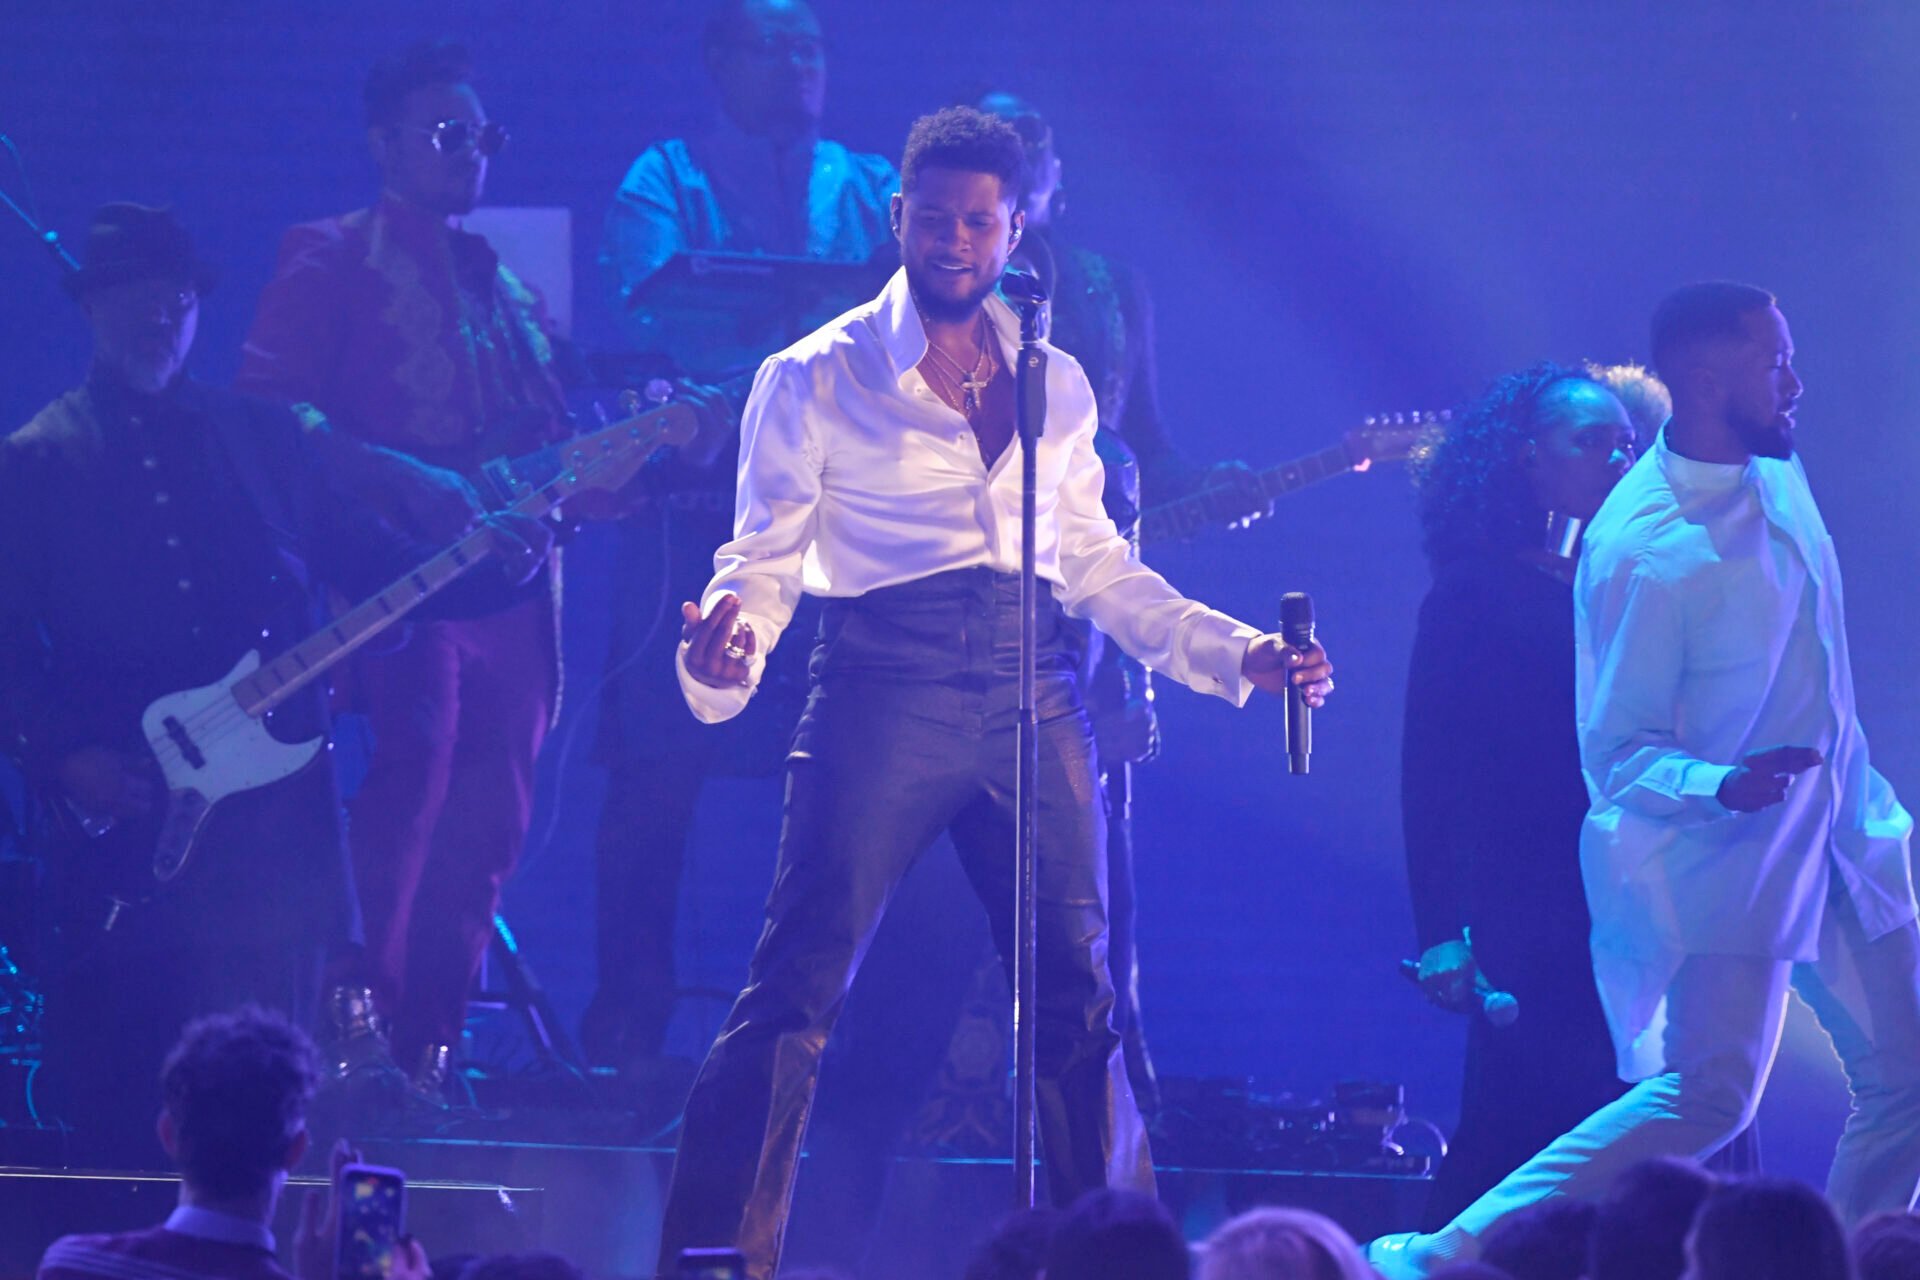 Usher performs a Prince tribute during the 62nd annual GRAMMY Awards on Jan. 26, 2020 at the STAPLES Center in Los Angeles, Calif.